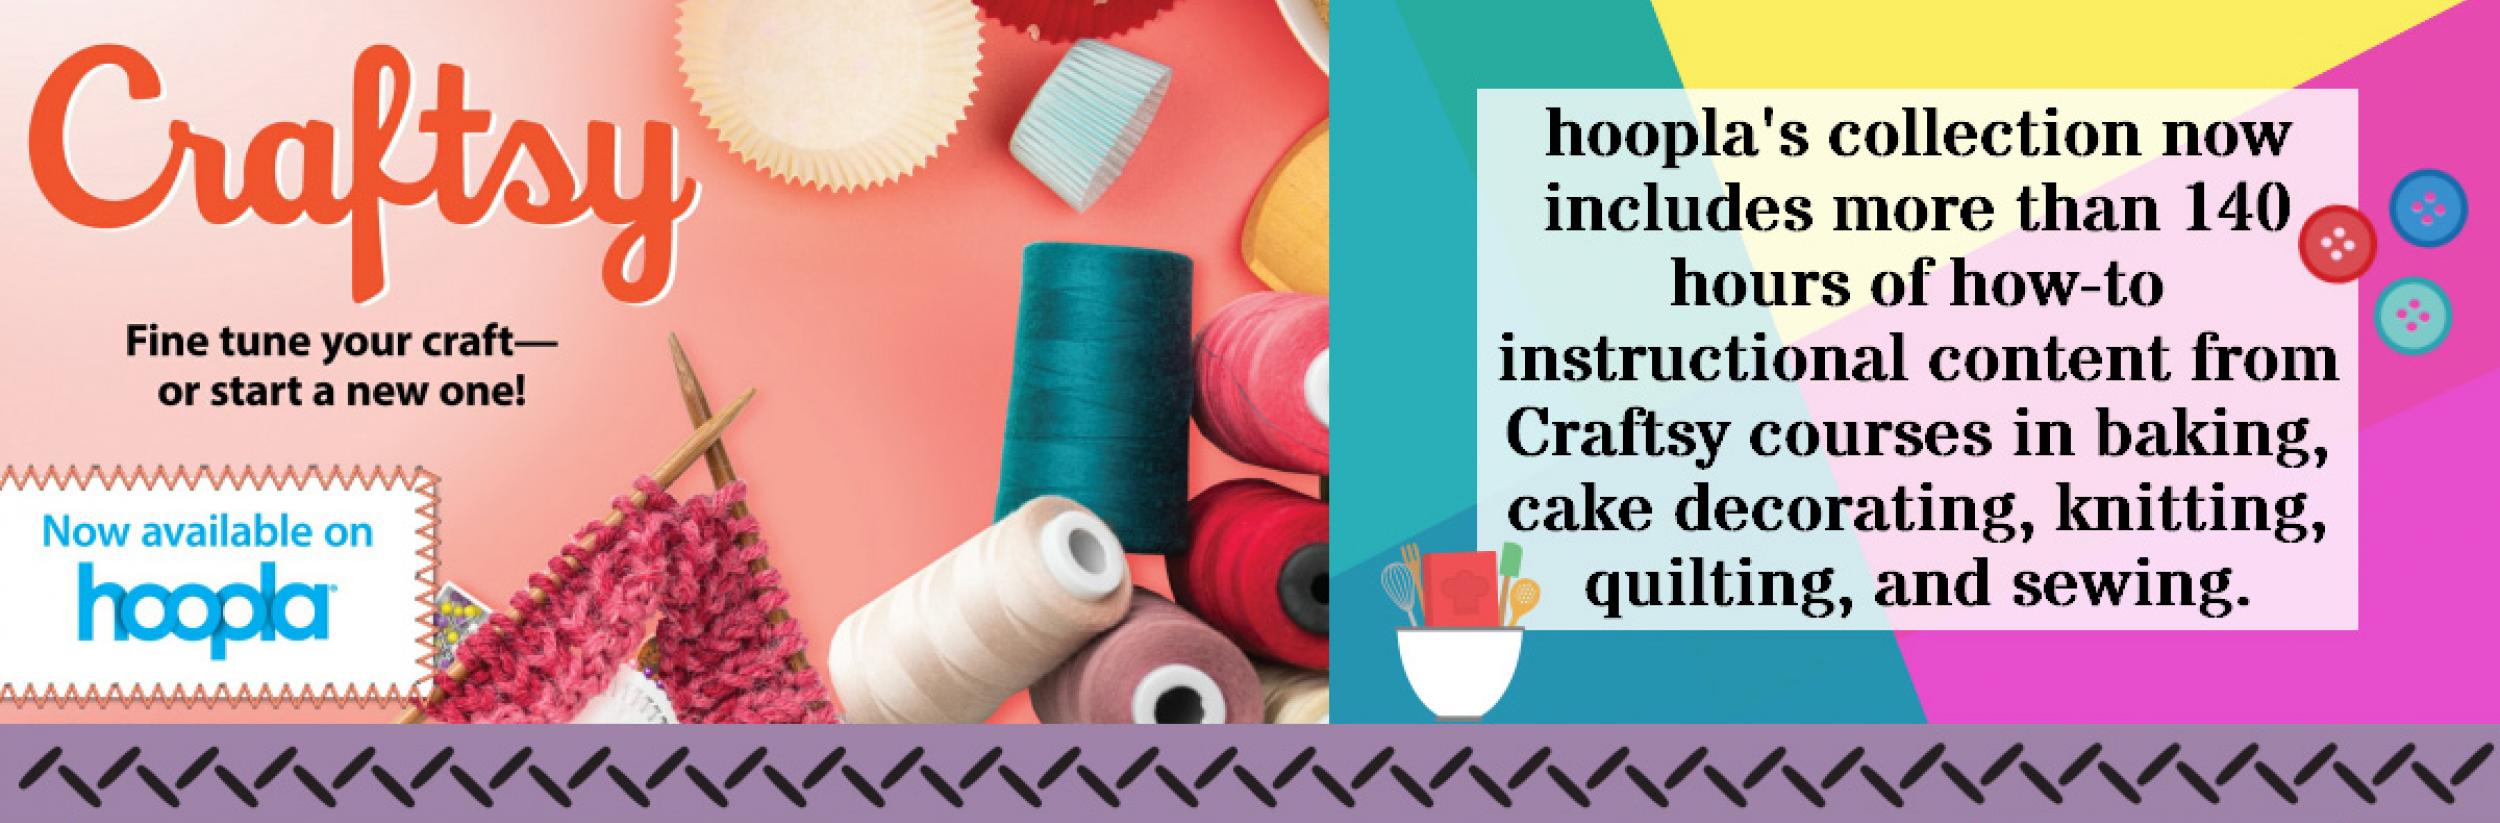 Image for "Craftsy Now Available on hoopla"